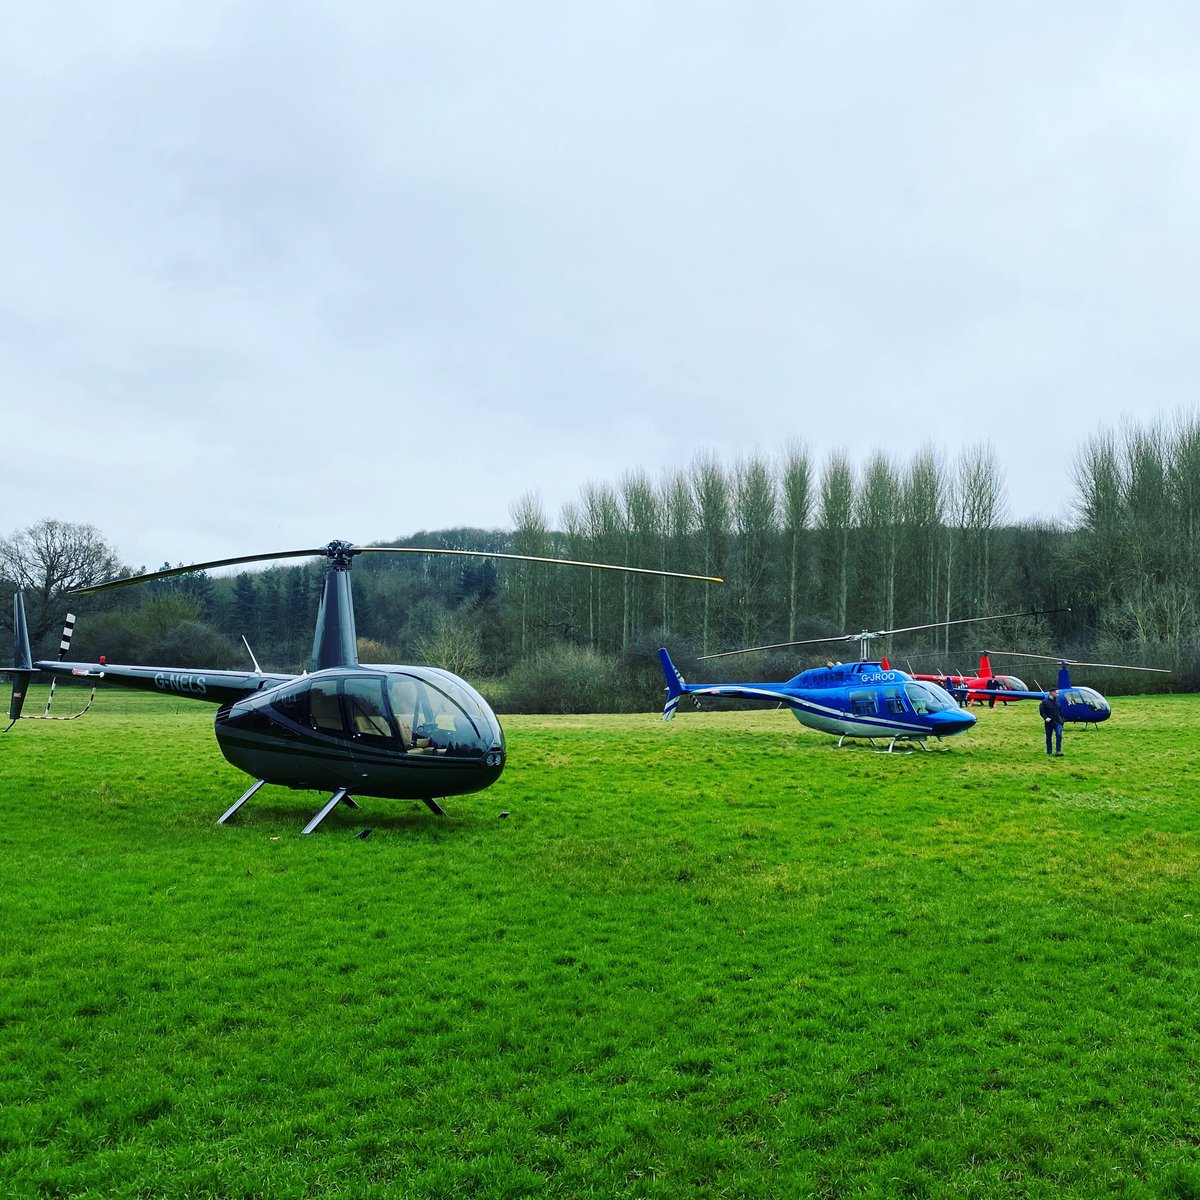 Quick lunch stop for us!
.
#helicopters #lunch #privatesite #leicestershire #aviation #field #cricket #b206 #r44 #r22 #avgeek